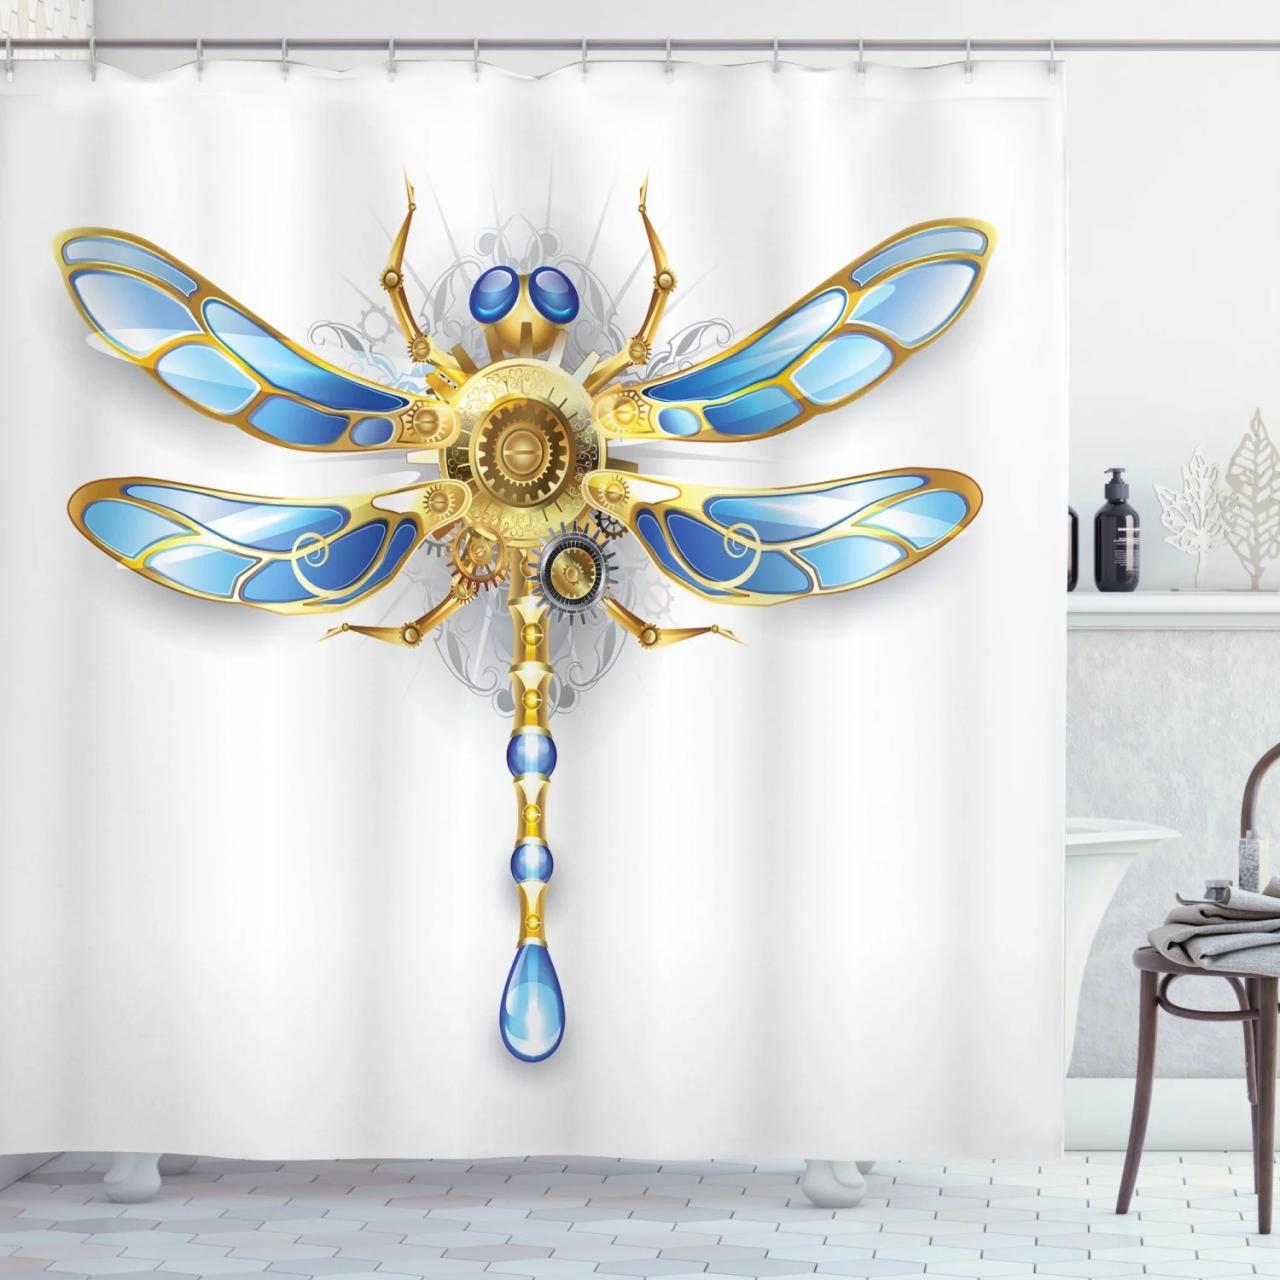 Dragonfly Shower Curtain, CloseUp View of Mechanical Dragonfly with